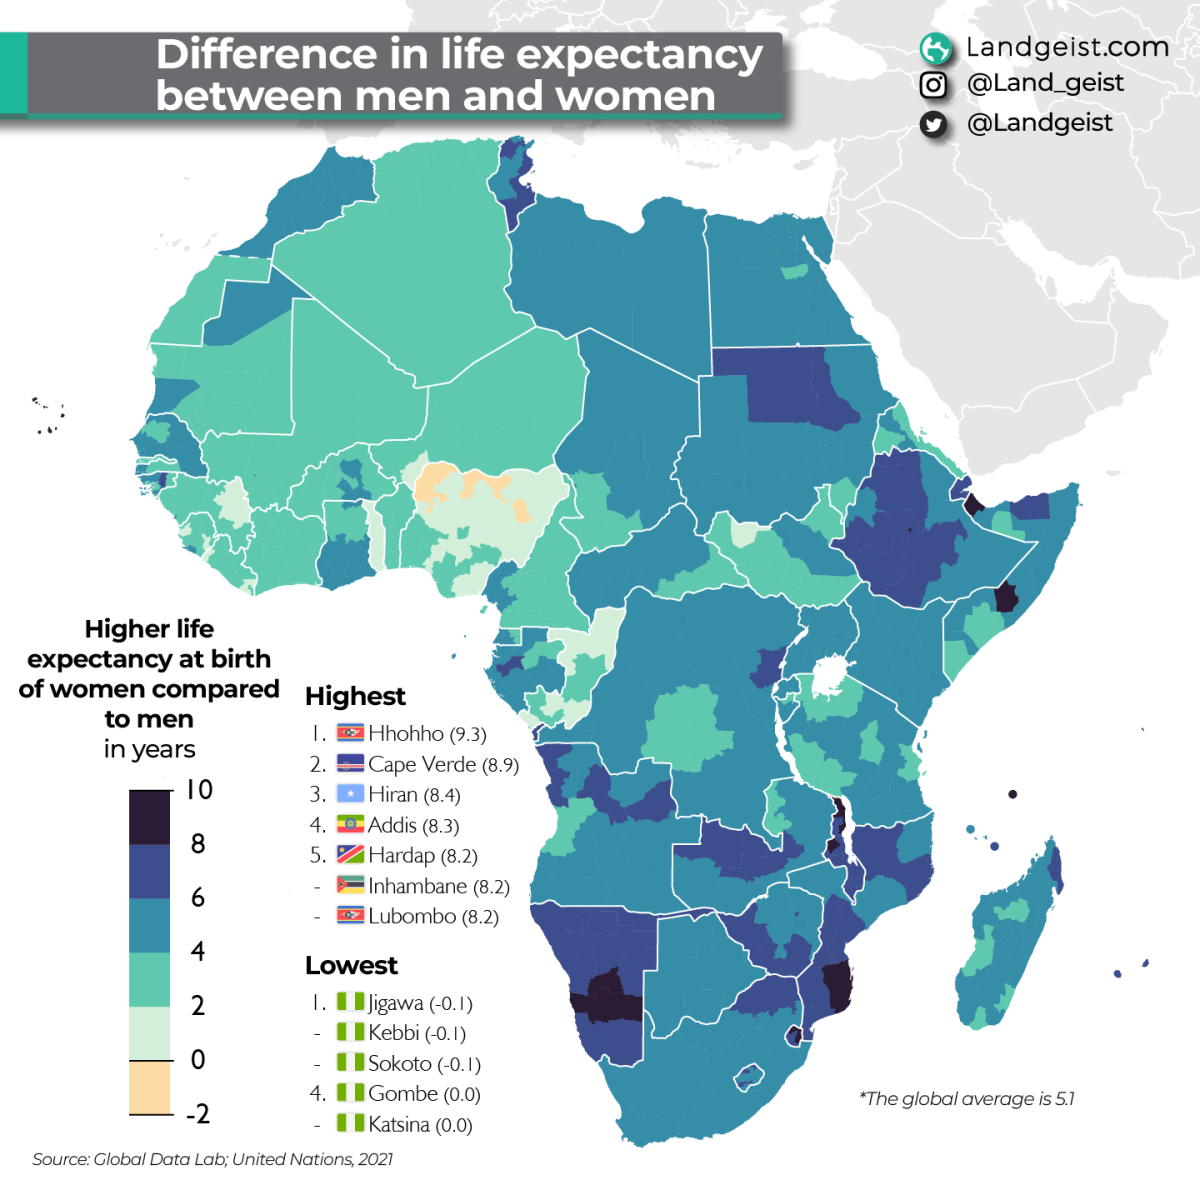 Difference in Life Expectancy Between Men and Women in Africa